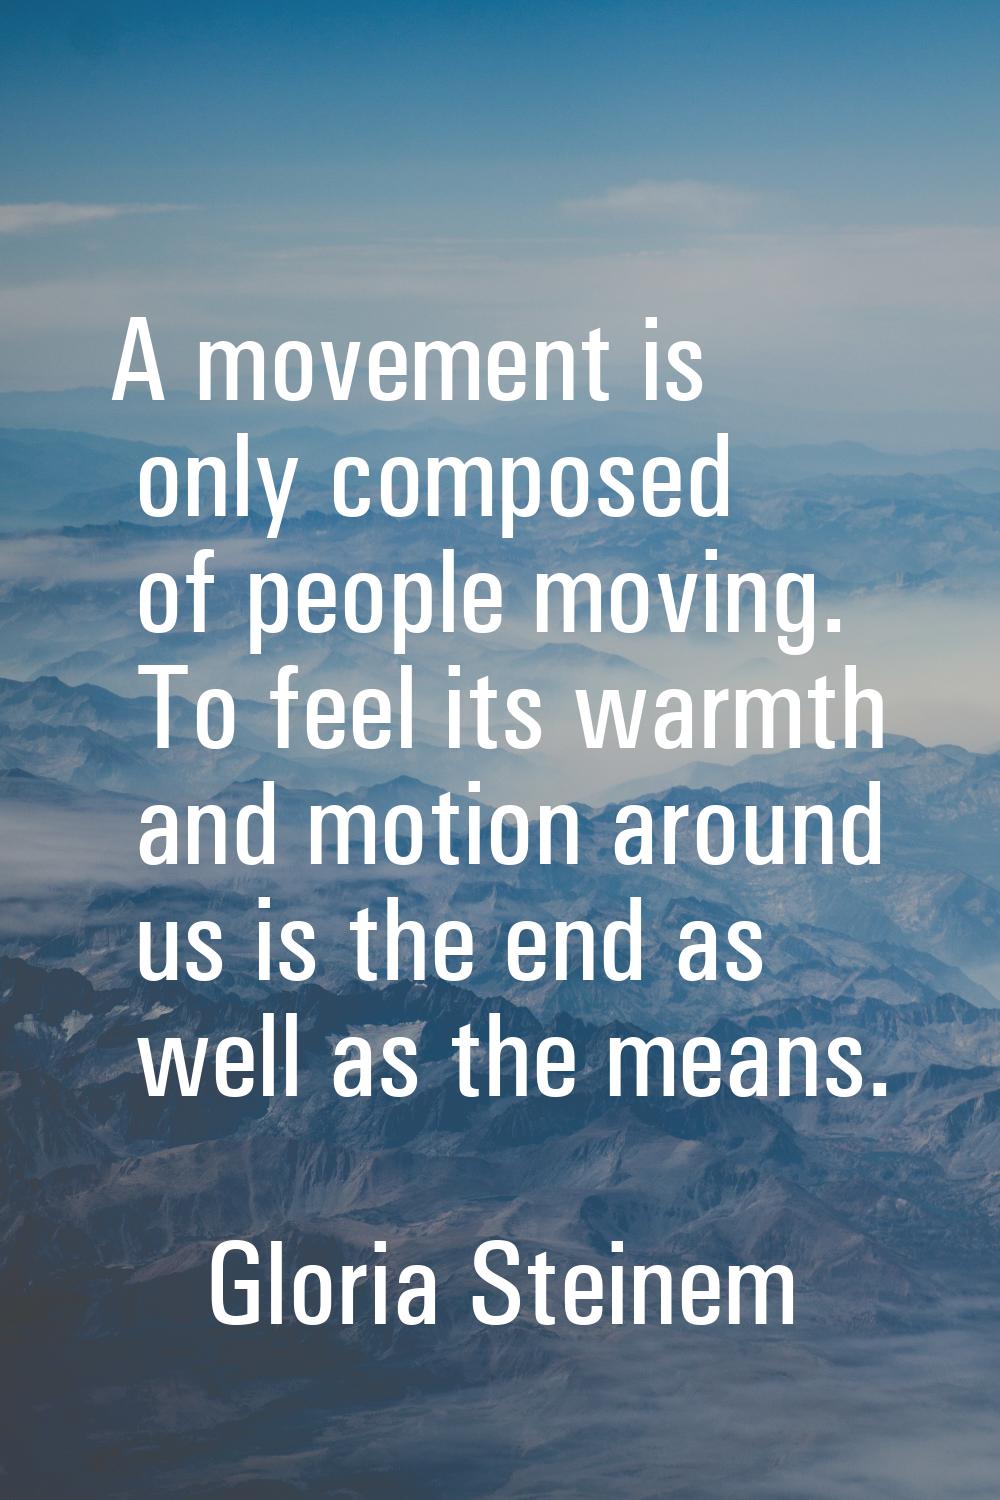 A movement is only composed of people moving. To feel its warmth and motion around us is the end as